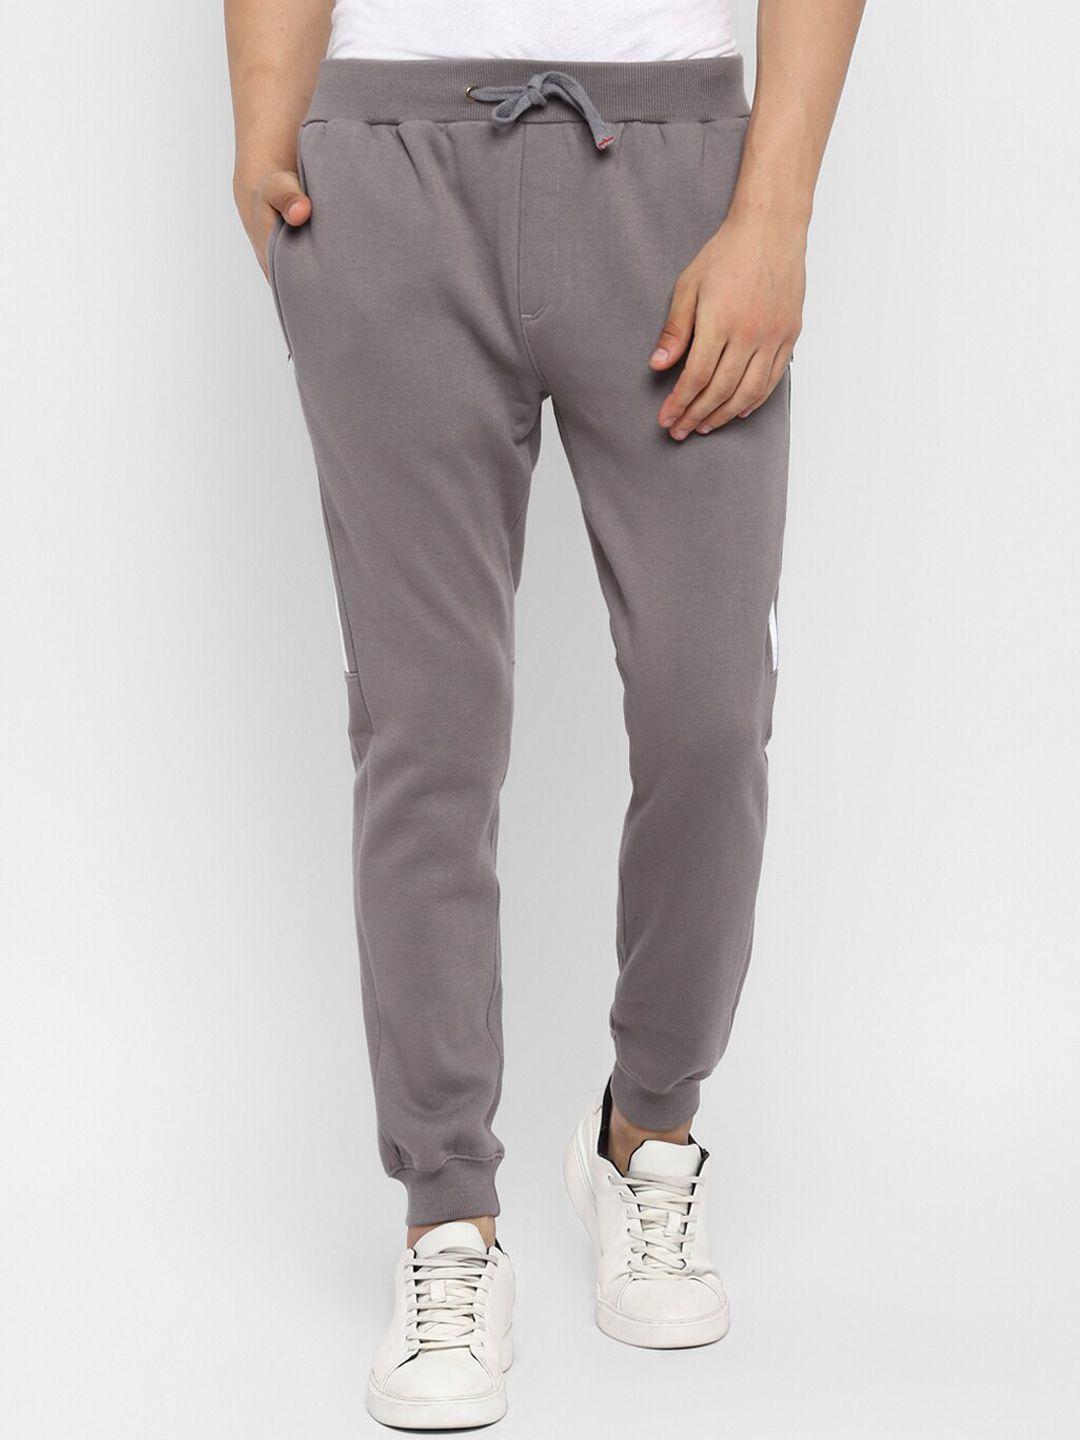 red-chief-men-grey-solid-cotton-track-pants